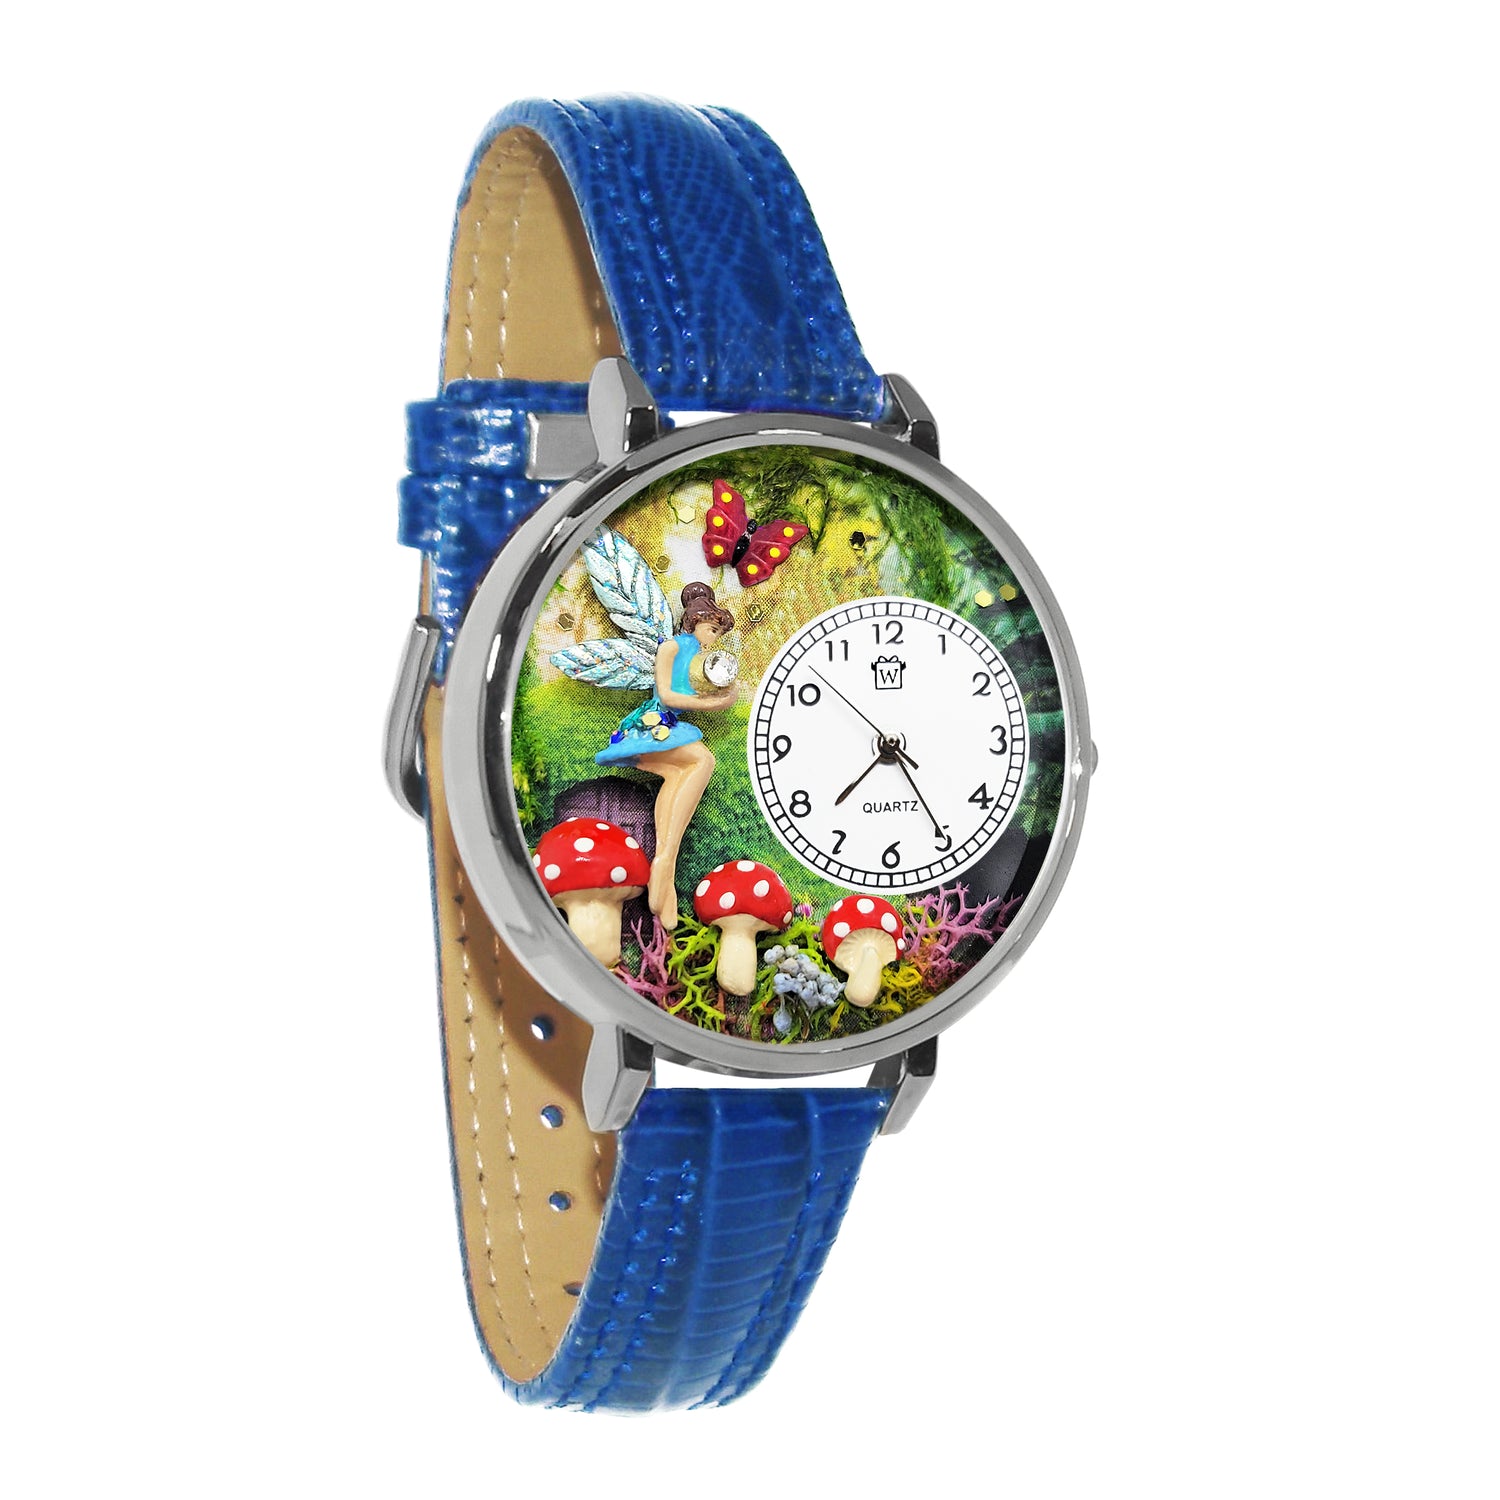 Whimsical Gifts | Fairy 3D Watch Large Style | Handmade in USA | Fantasy & Mystical | | Novelty Unique Fun Miniatures Gift | Silver Finish Royal Blue Leather Watch Band